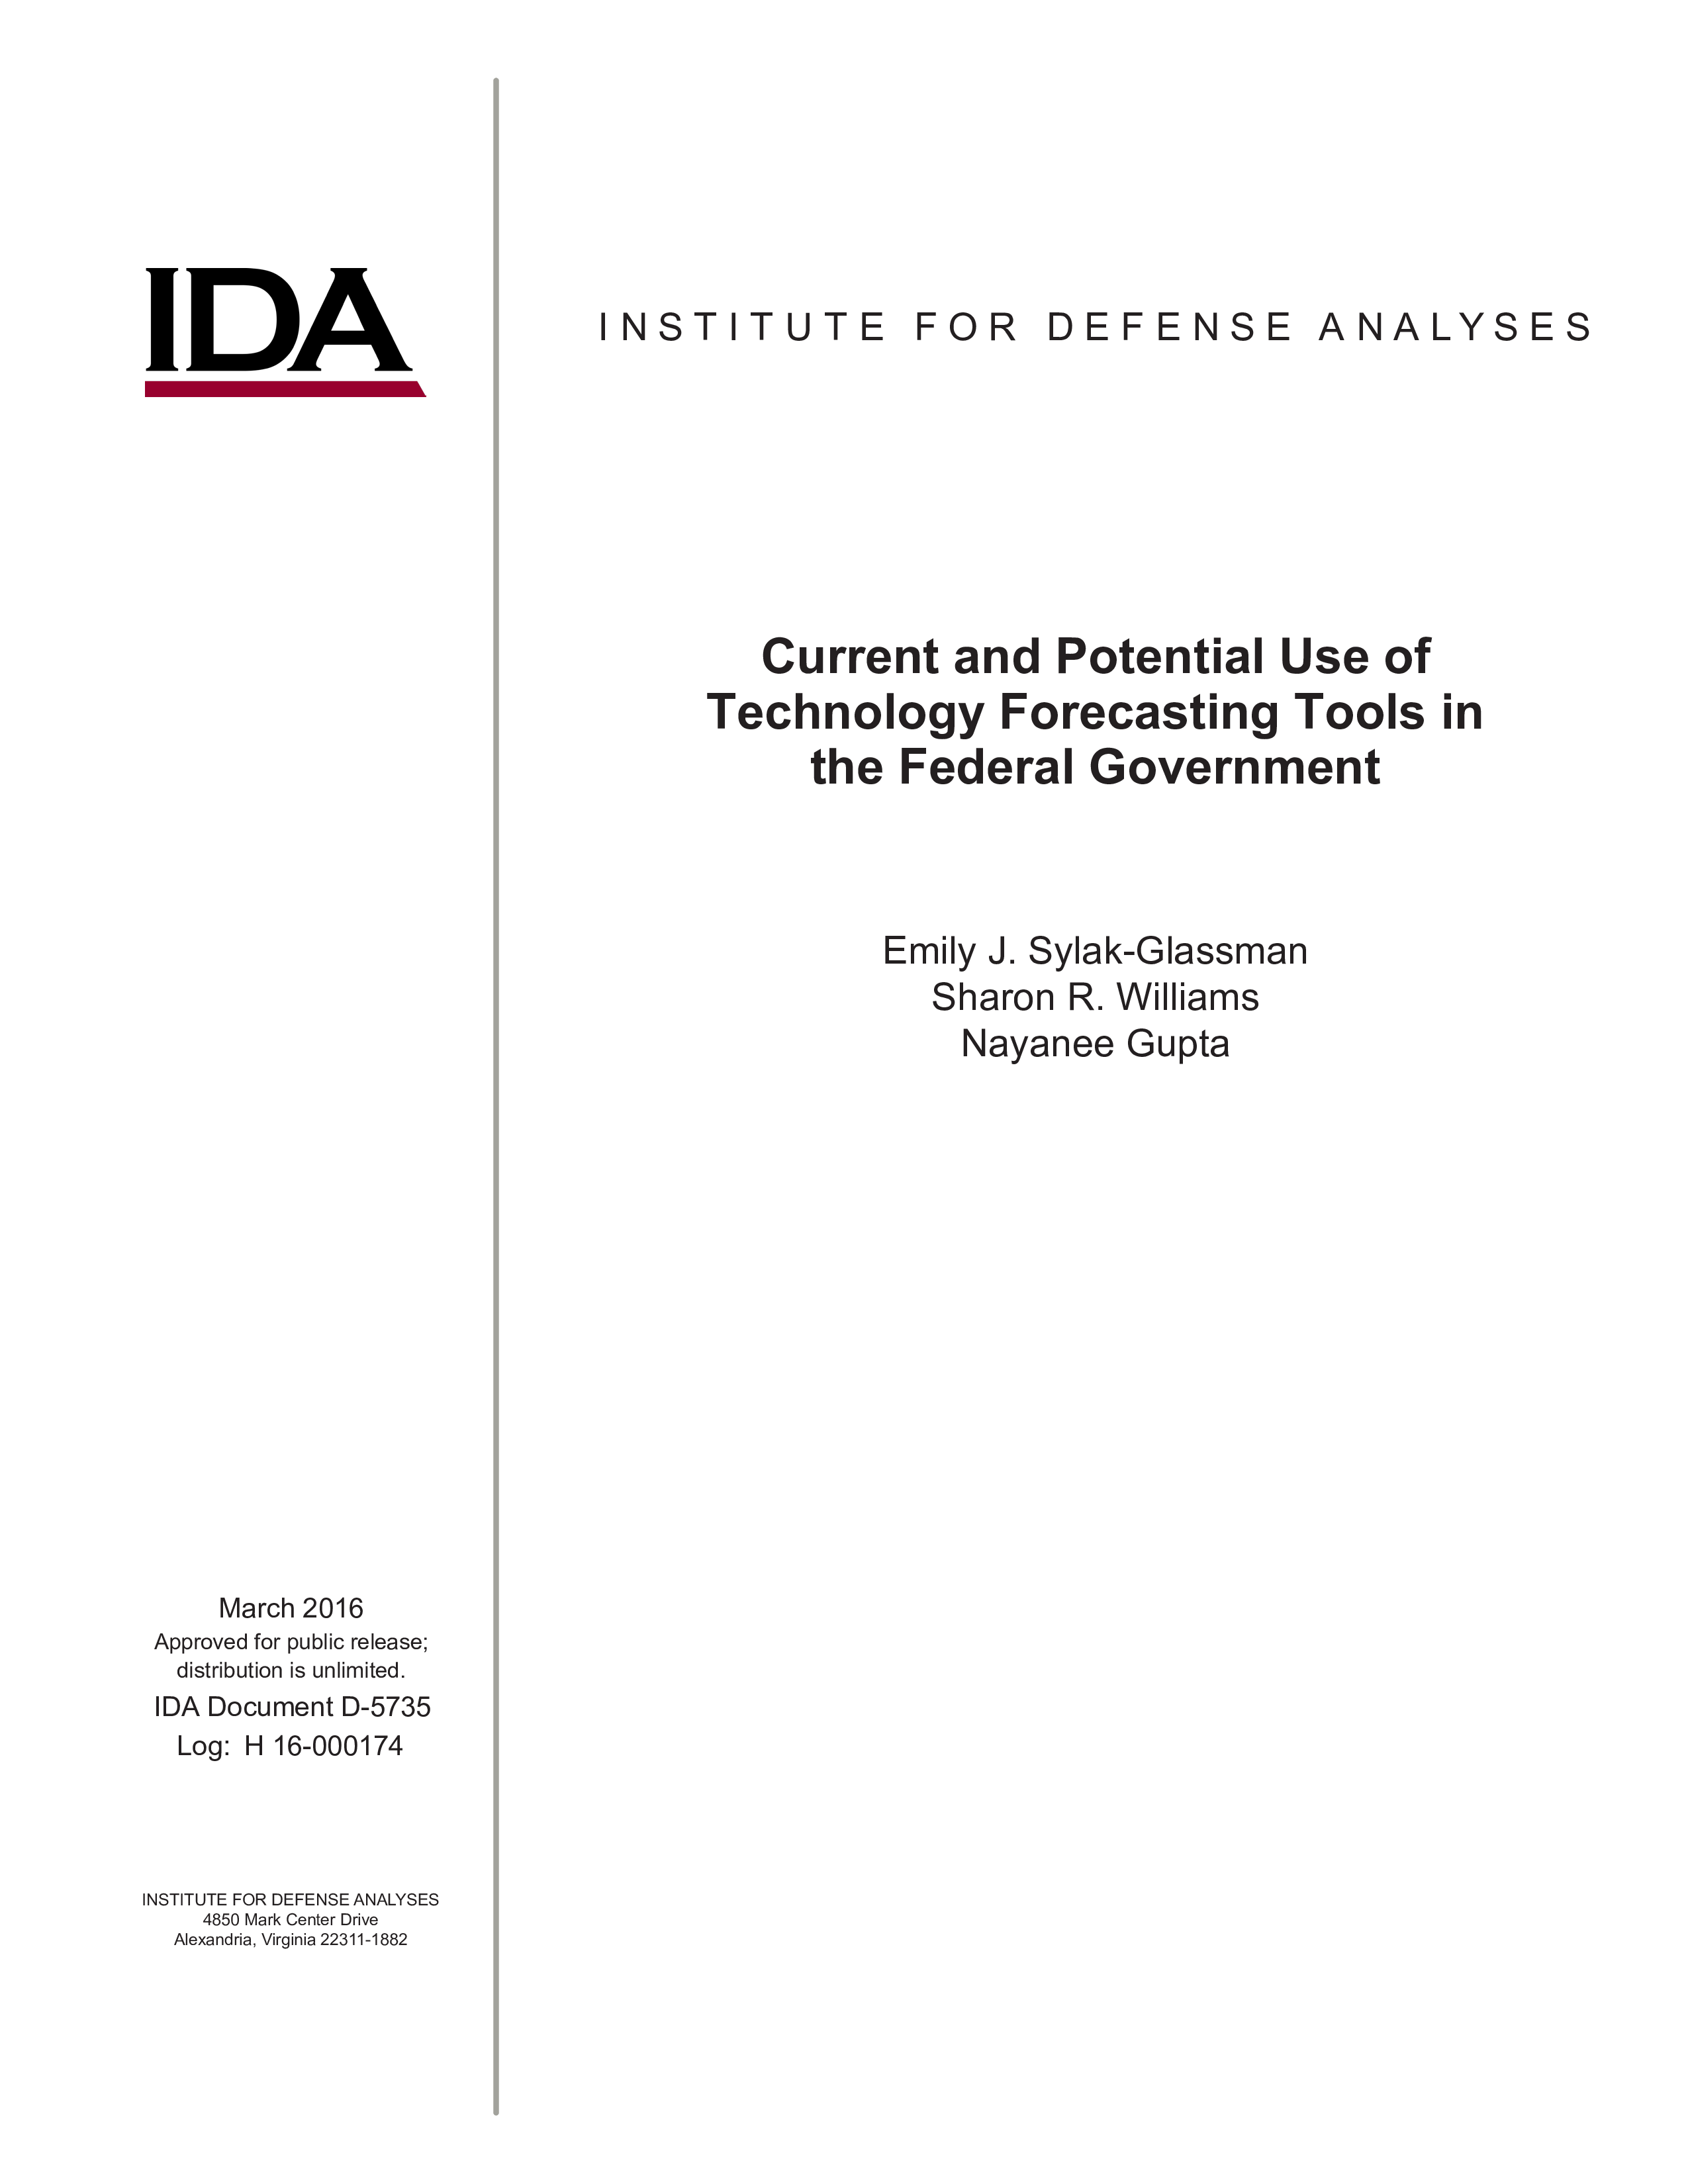 Current and Potential Use of Technology Forecasting Tools in the Federal Government/D-5735